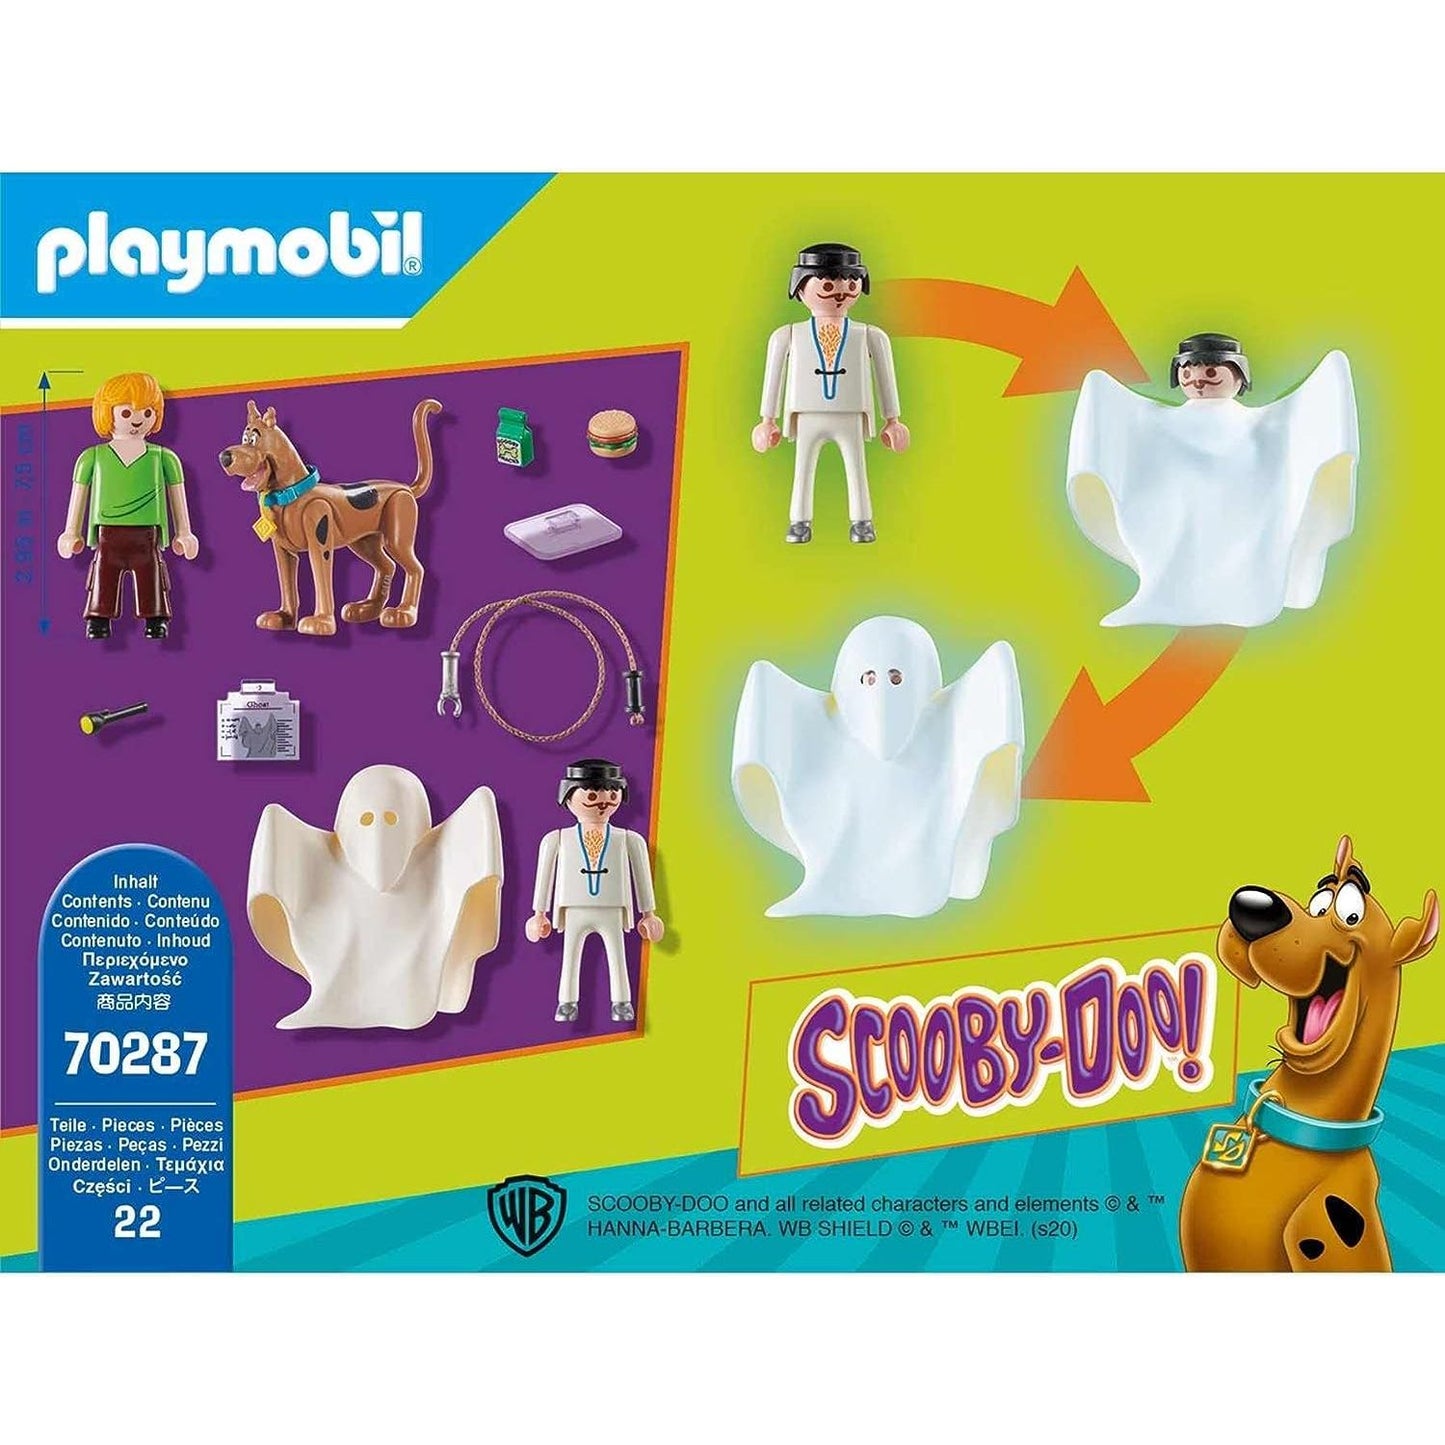 Scooby-Doo! Scooby & Shaggy with Ghost